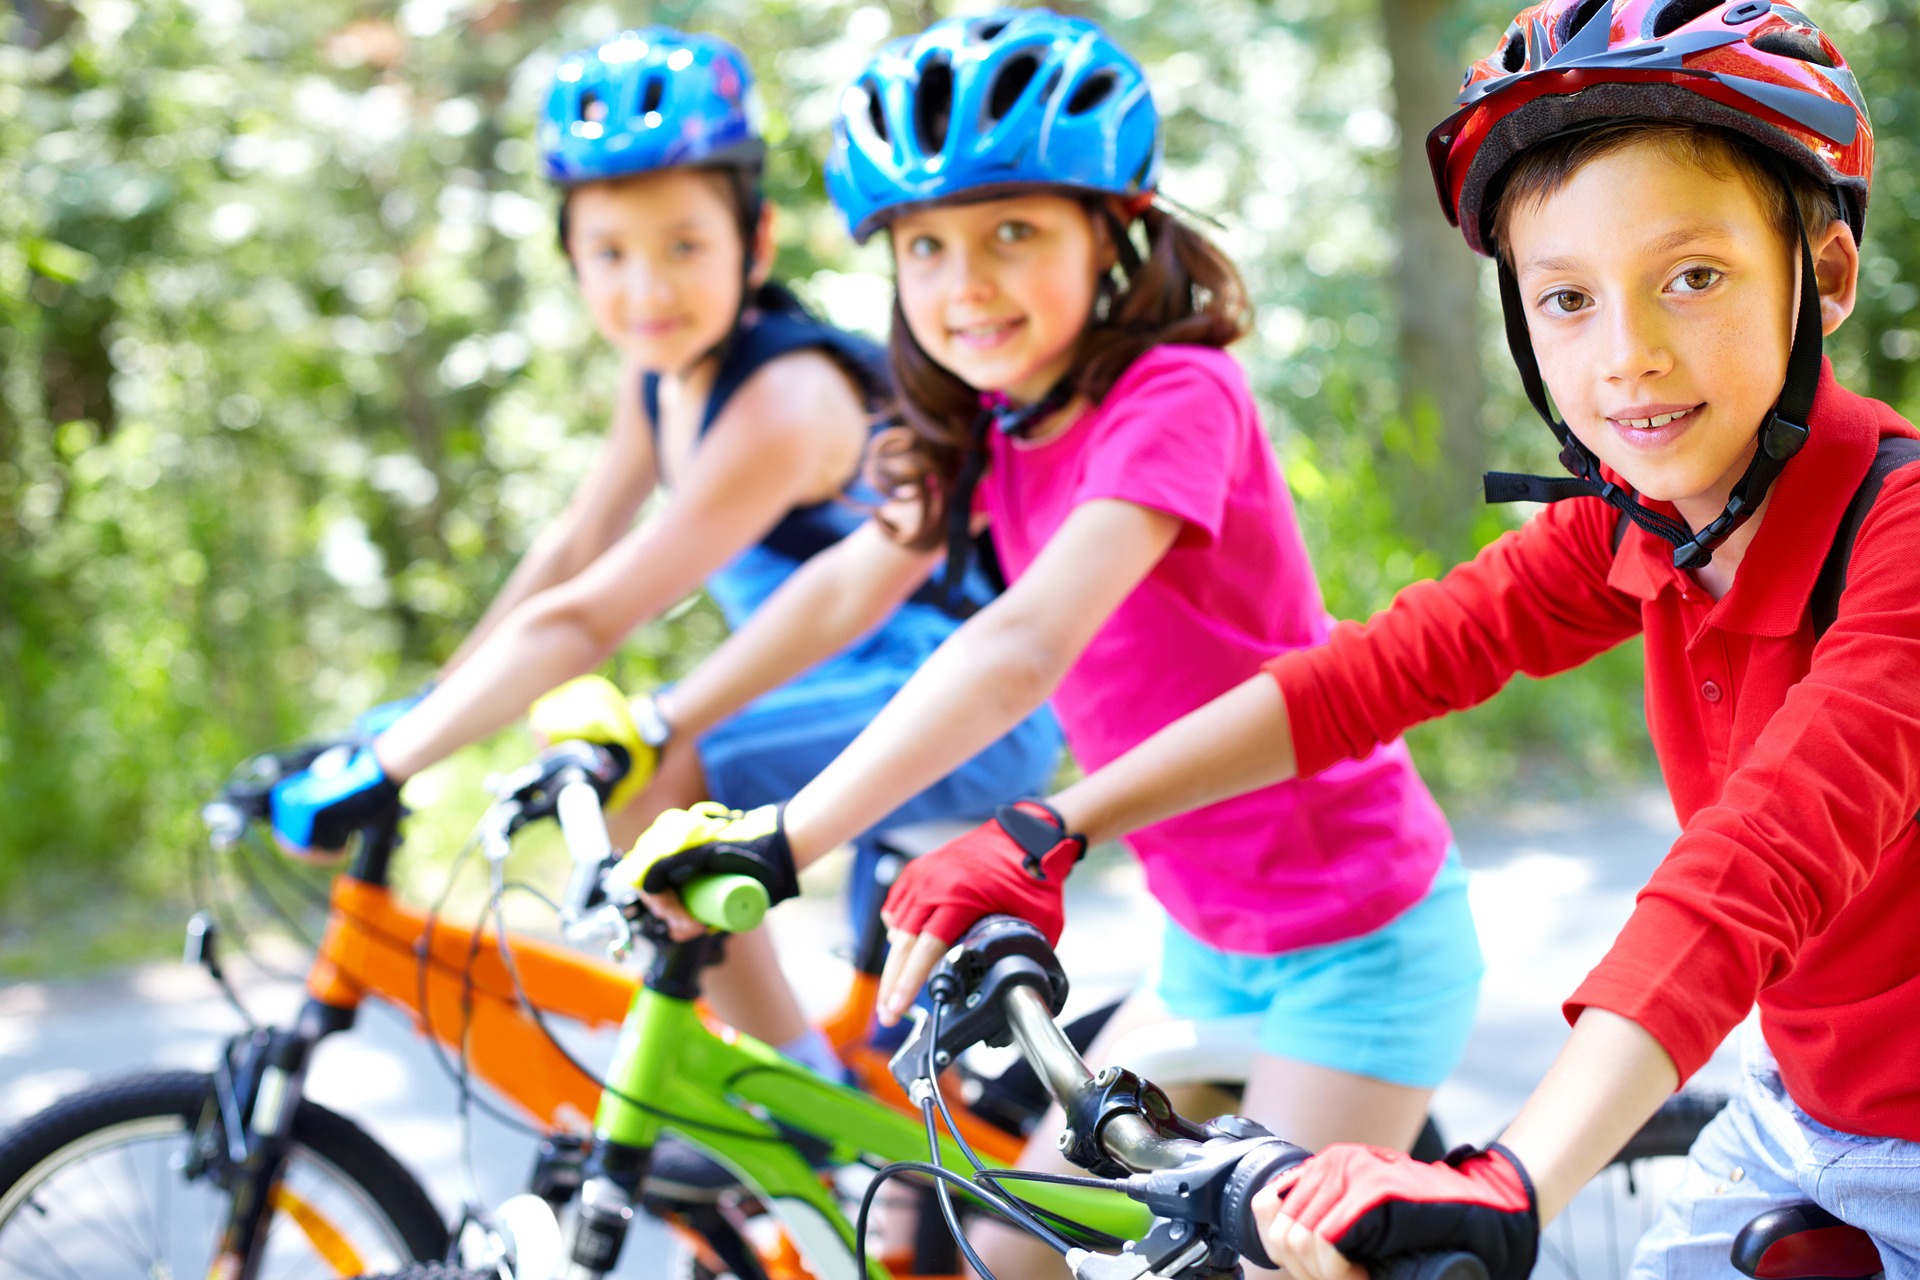 The Power of Movement: The Benefits of Physical Activity for Children